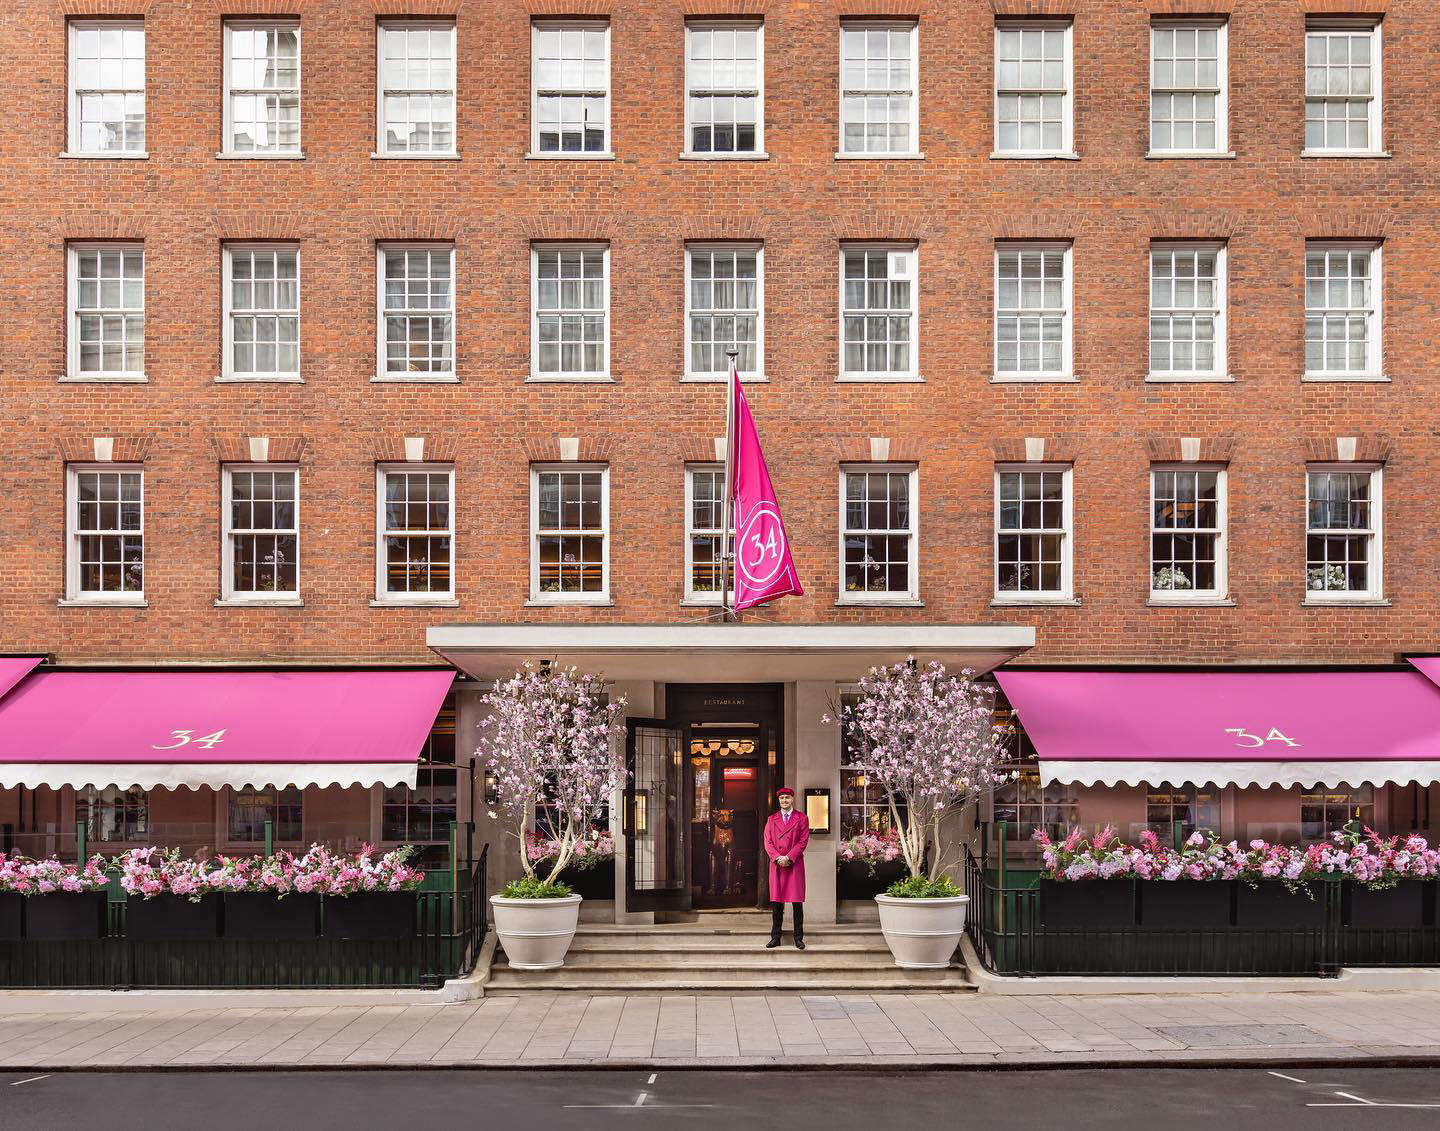 image  1 Wander through Grosvenor Square this Spring to find our rosy pink awning atop a ravishing terrace di